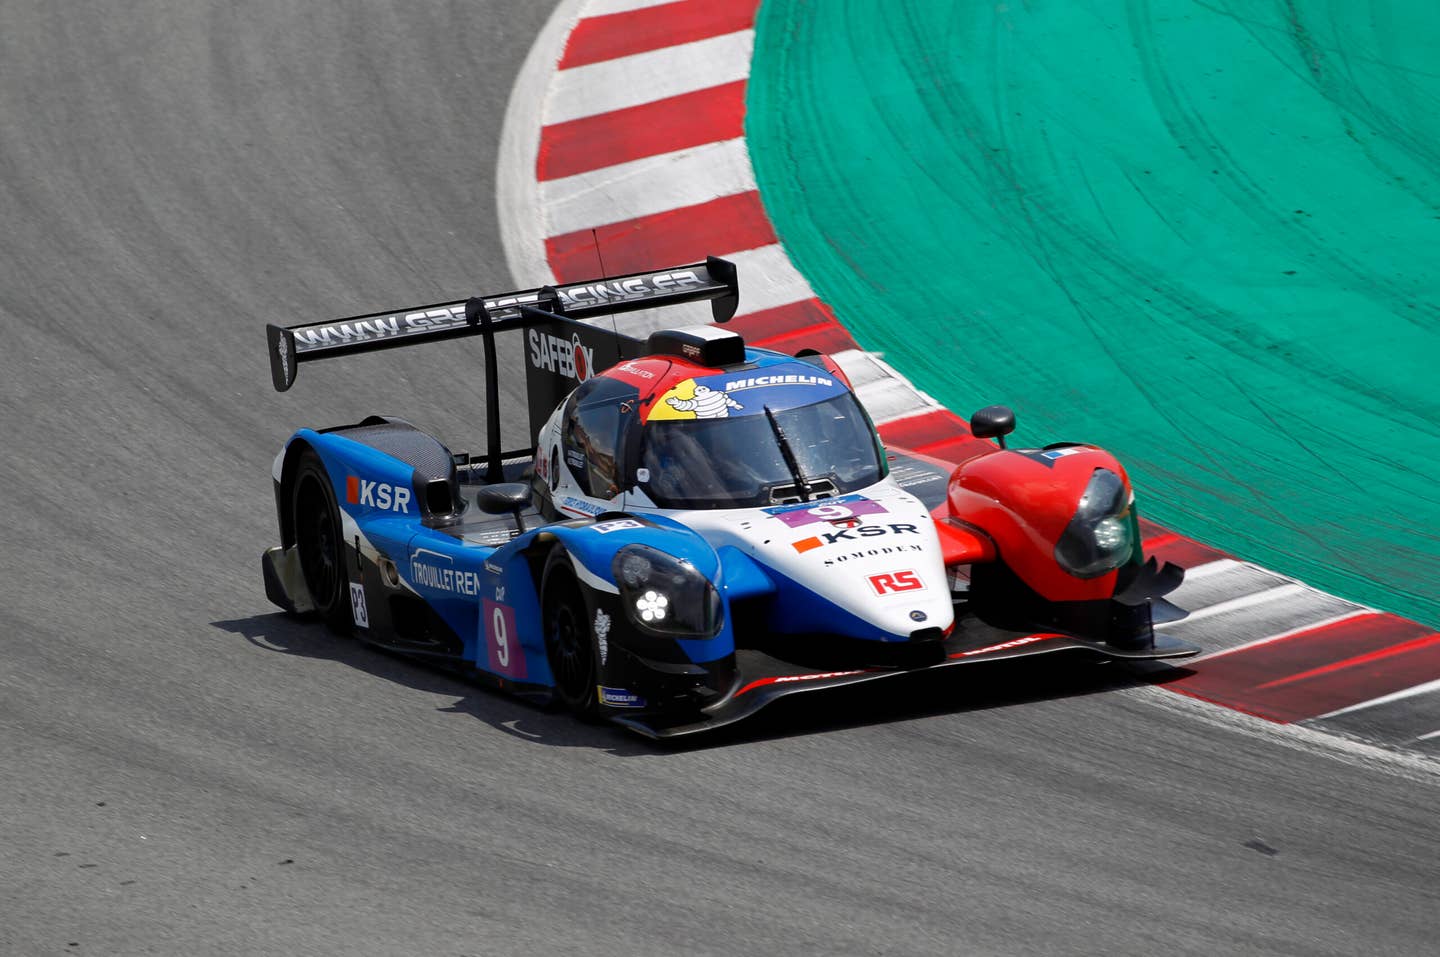 Norma M 30 Nissan of  E. Trouillet and A. Trouillet (Graff) during the training sessions of the Michelin Le Mans Cup corresponding to the European Le Mans Series at the Barcelona-Catalunya circuit, on 19th jULY 2019, in Barcelona, Spain. 
 -- (Photo by Urbanandsport/NurPhoto via Getty Images)